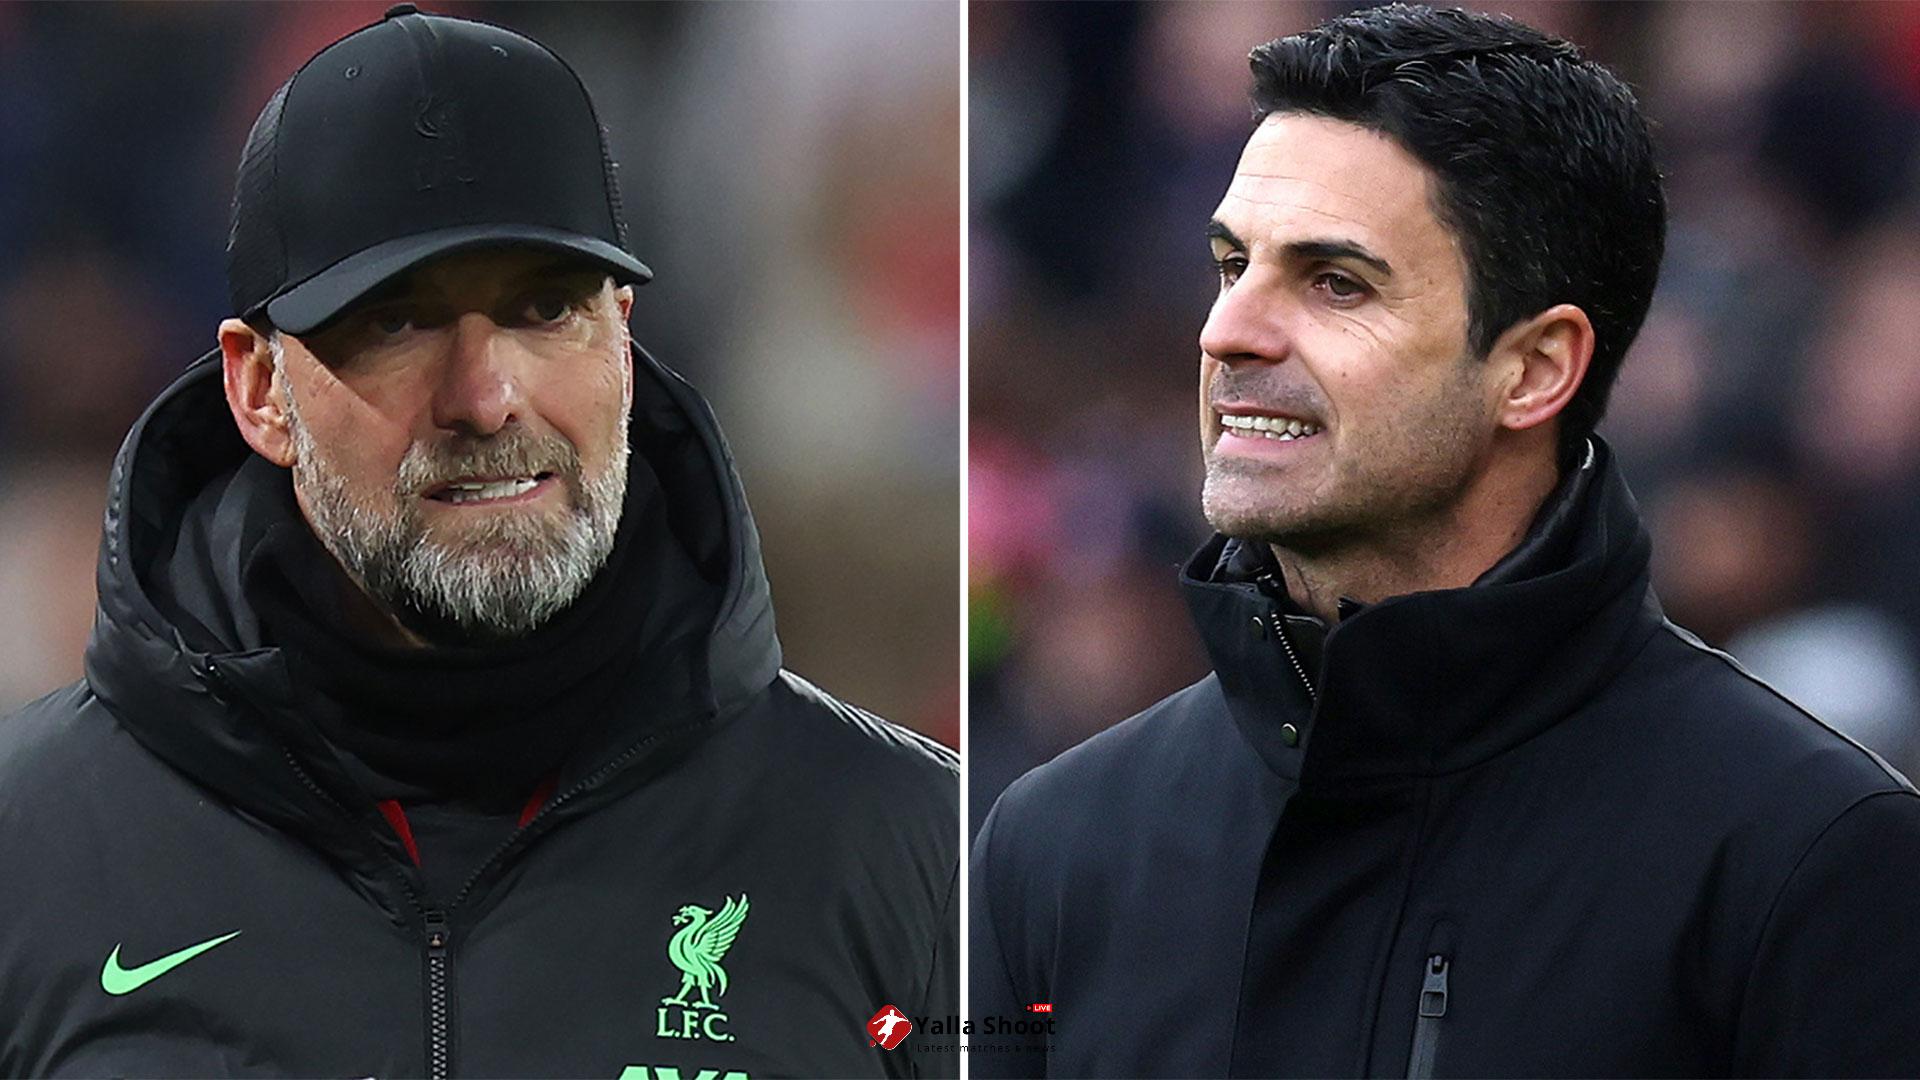 Fans fume 'you can't make this up' after controversial VAR confirmed for huge Arsenal vs Liverpool clash